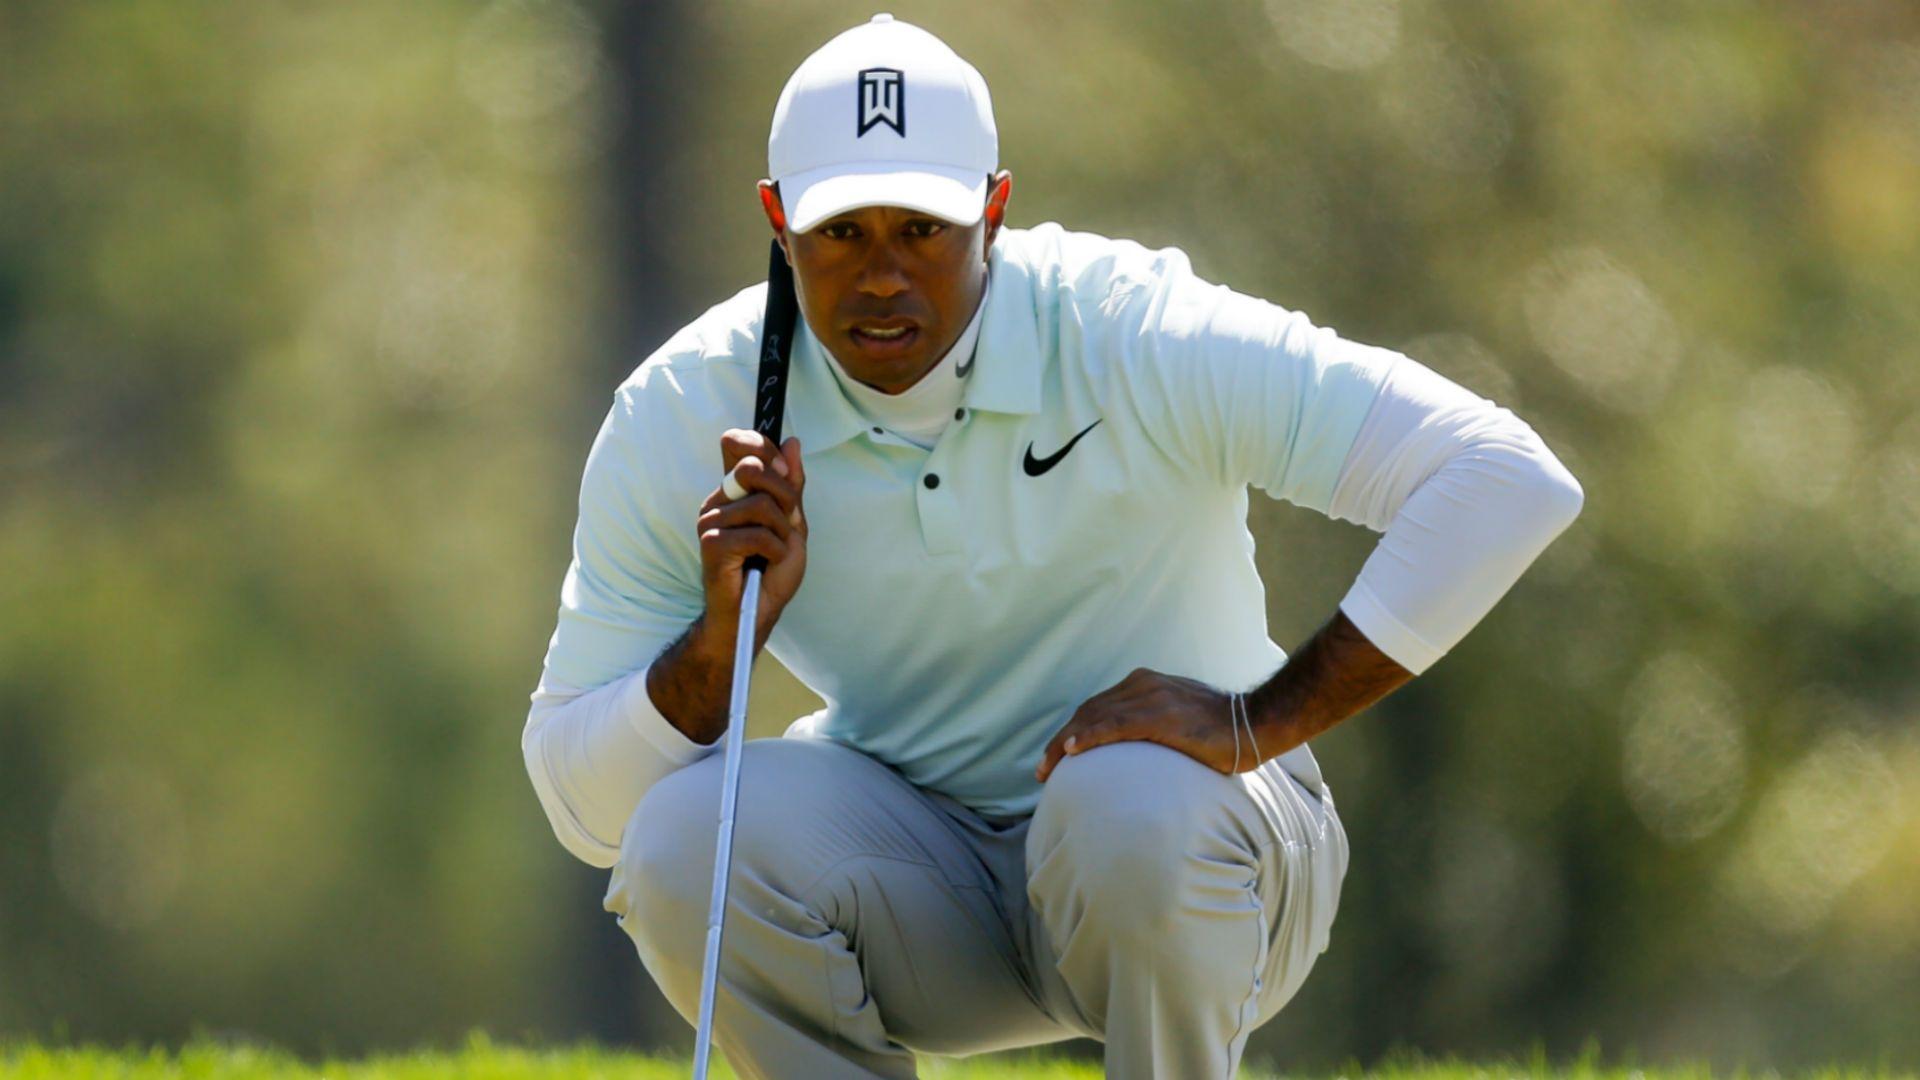 Live updates from Tiger Woods' Round 3 at the Valspar Championship